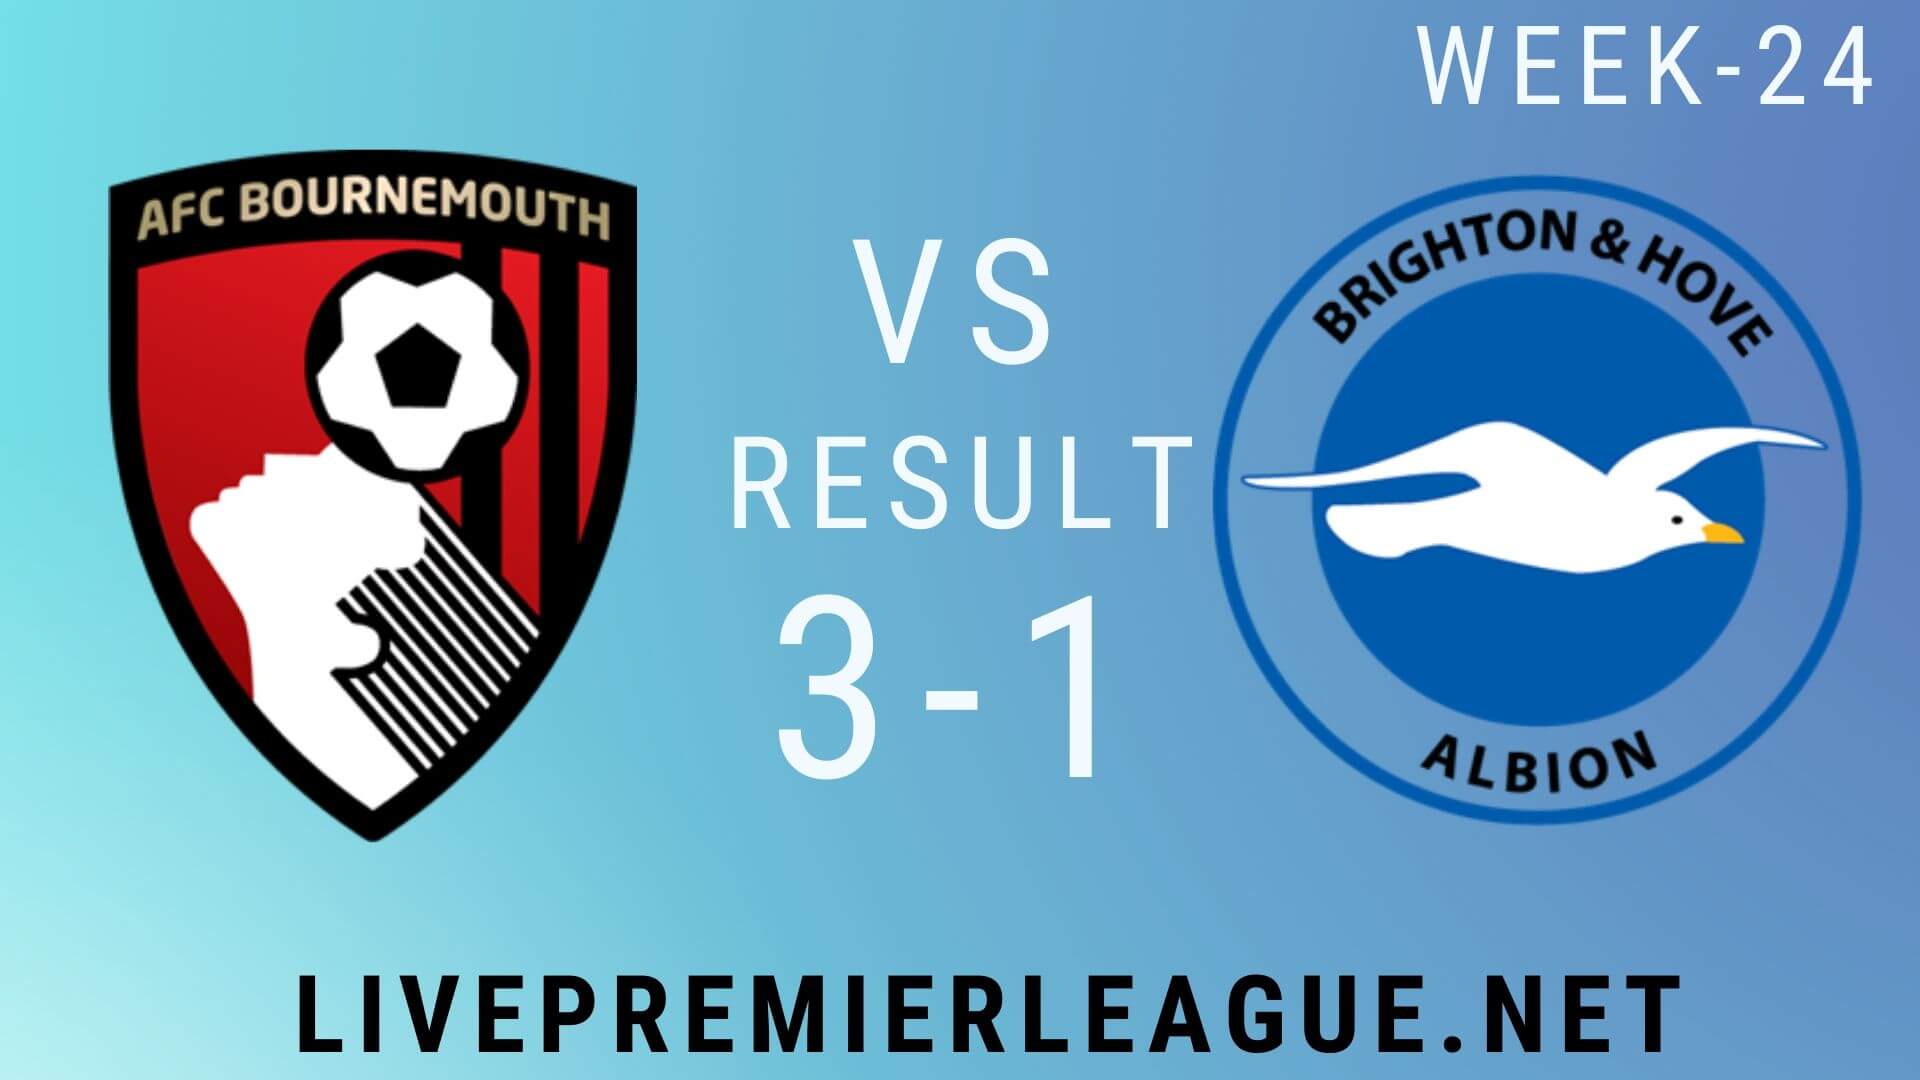 AFC Bournemouth Vs Brighton and Hove Albion | Week 24 Result 2020